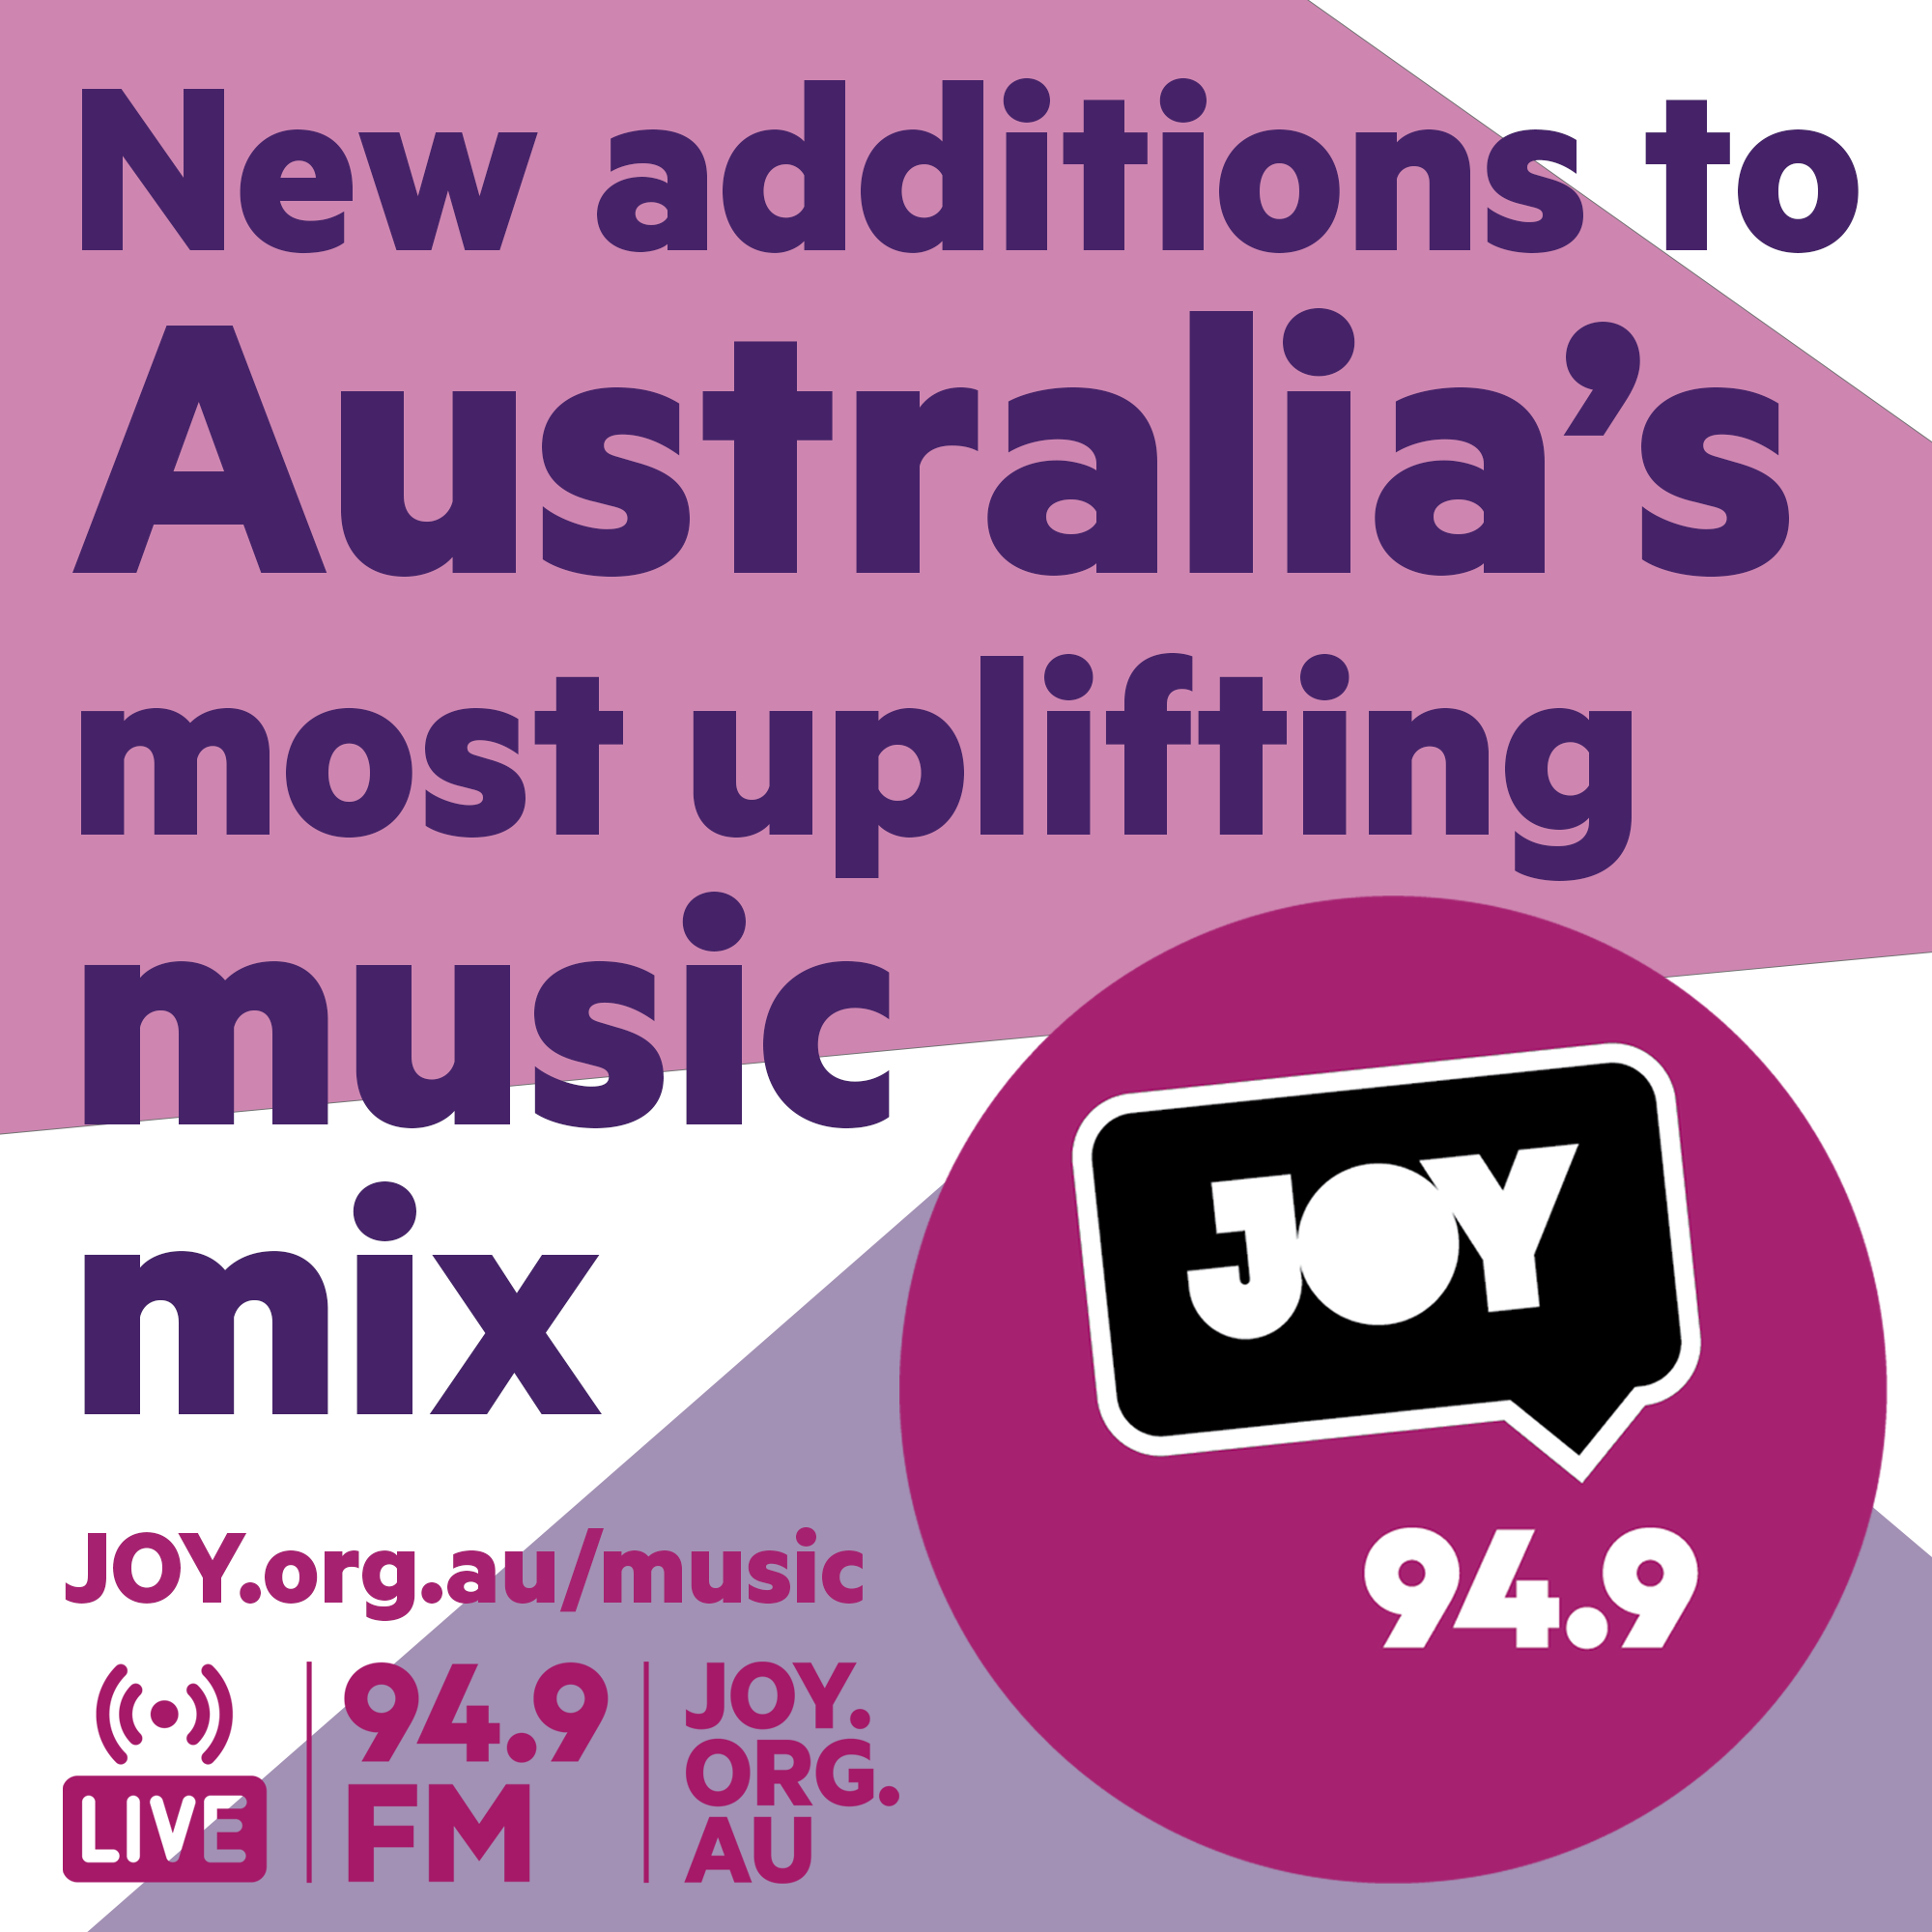 The newest songs to Australia’s most uplifting music mix: 11 May 2022